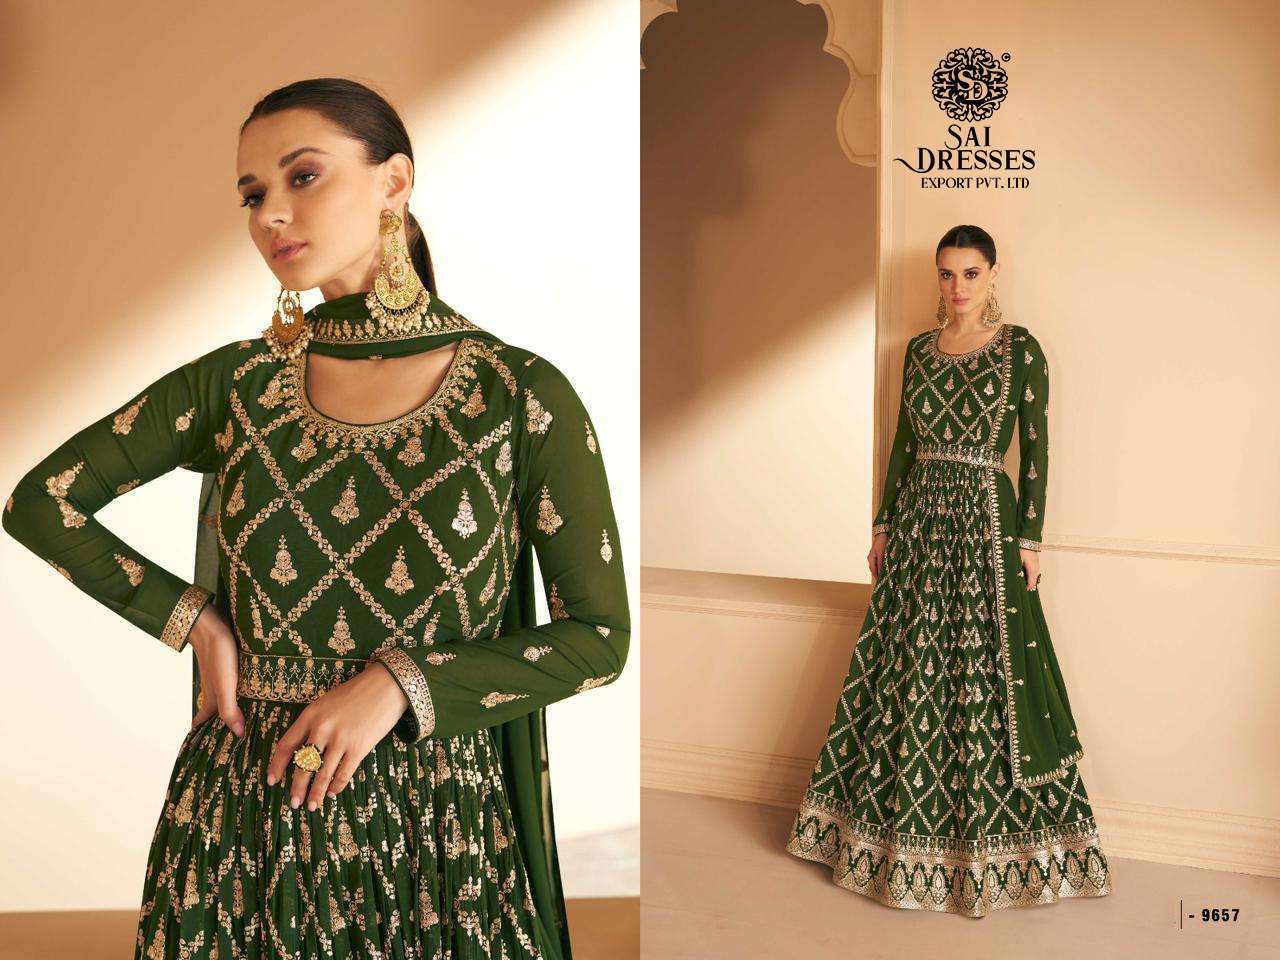 SAI DRESSES PRESENT ALMORA READYMADE WEDDING WEAR LONG DESIGNER GOWN WITH DUPATTA IN WHOLESALE RATE IN SURAT